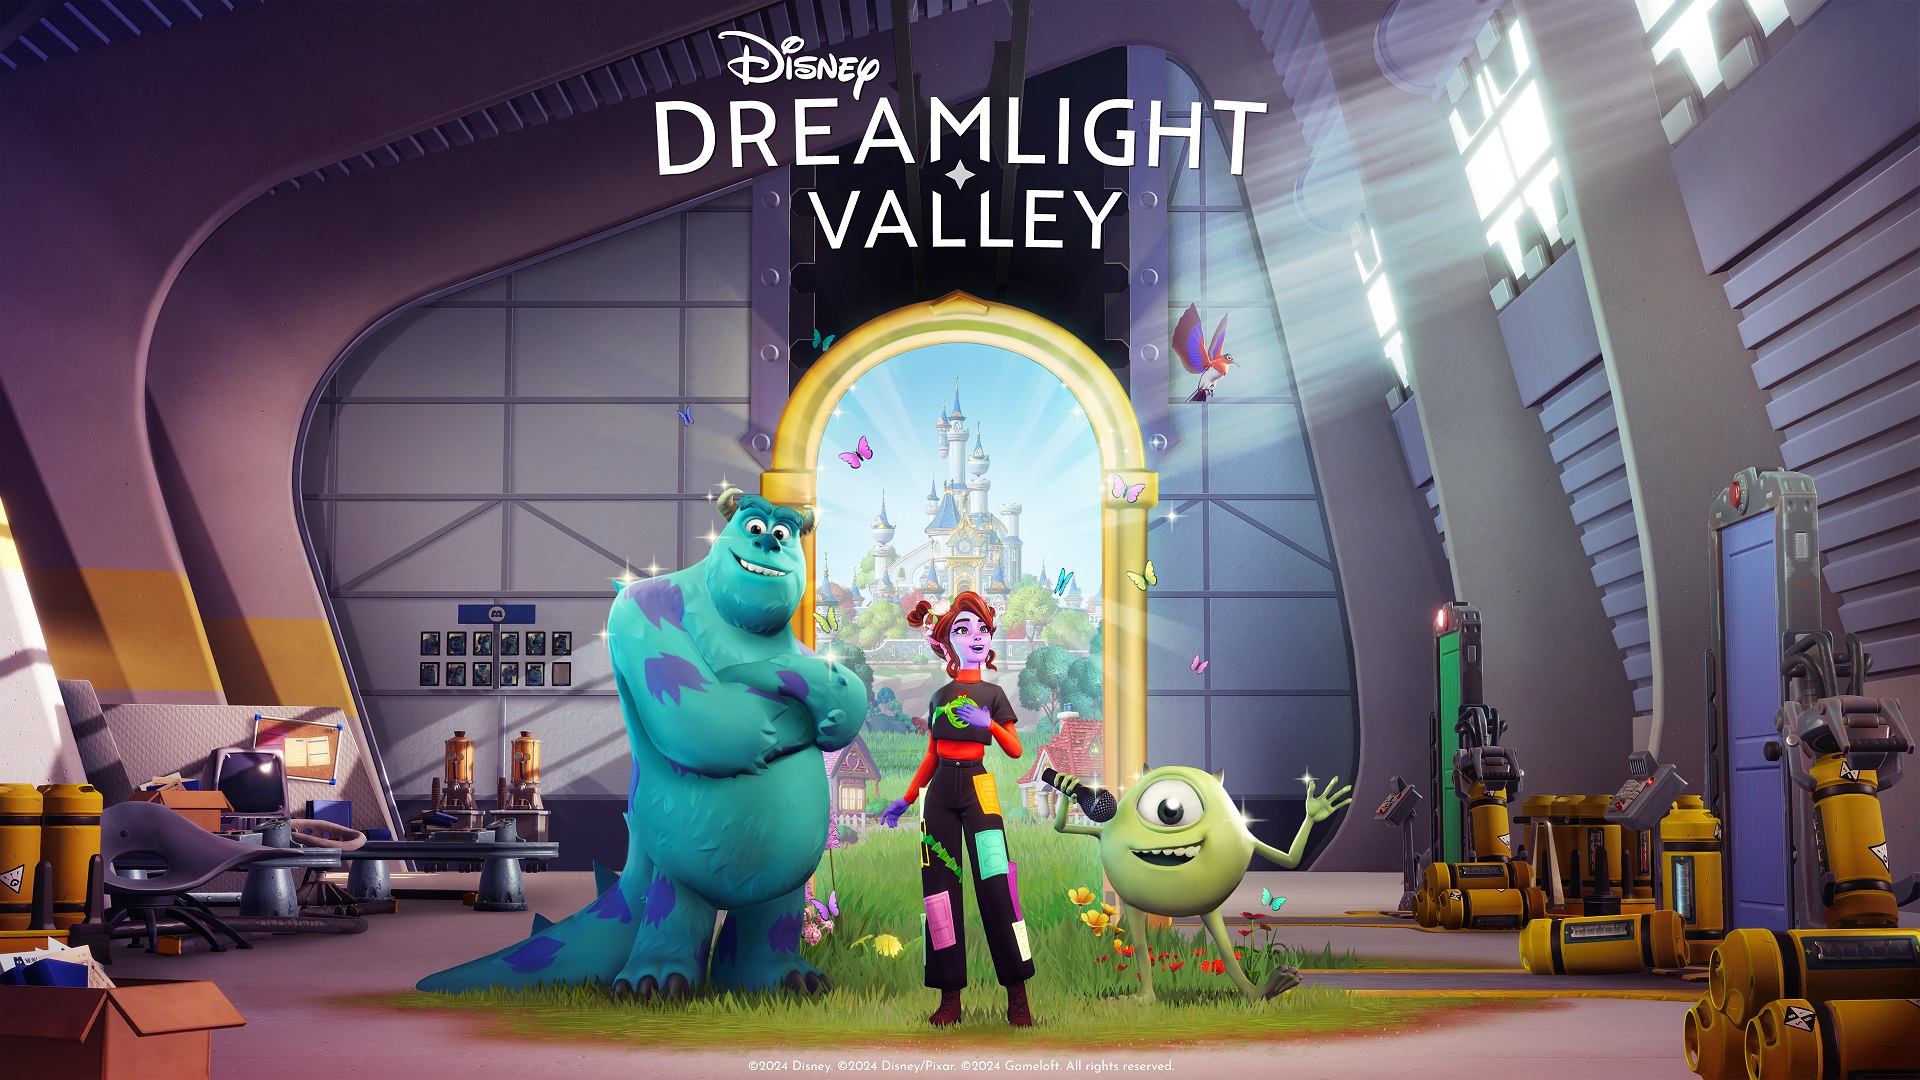 Monsters, Inc coming to Disney Dreamlight Valley this week